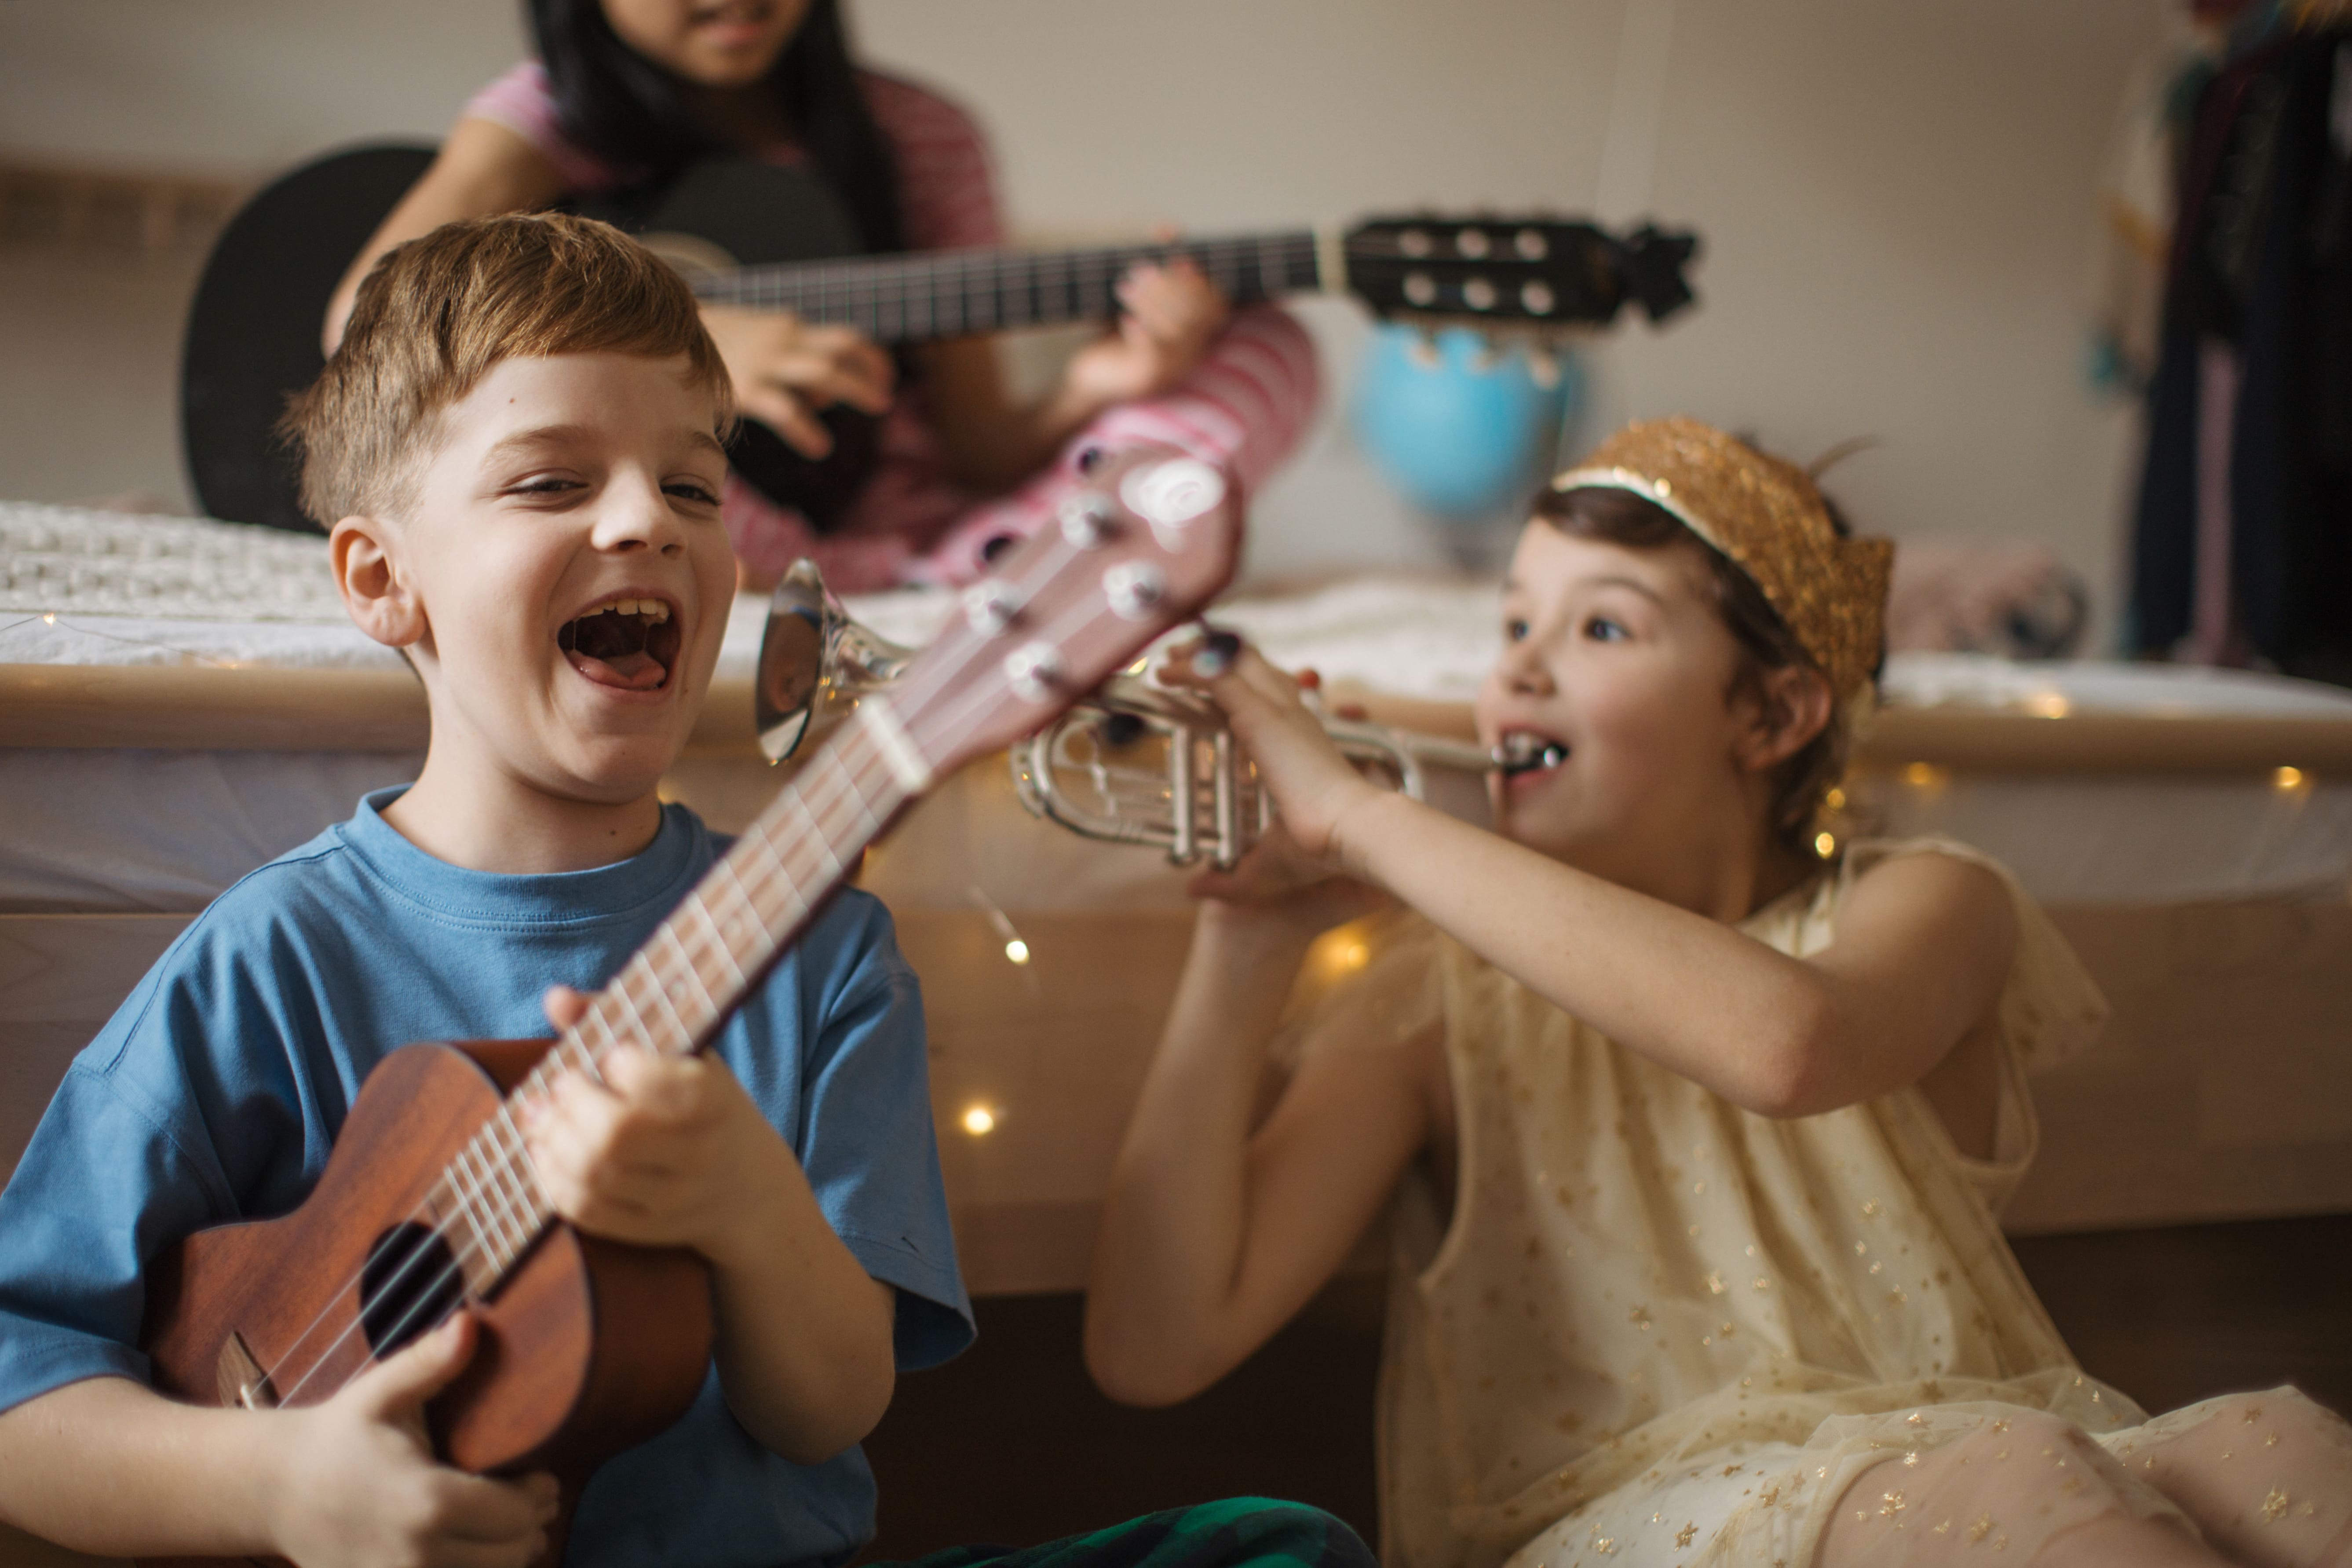 Two children laughing and having fun playing musical instruments. 